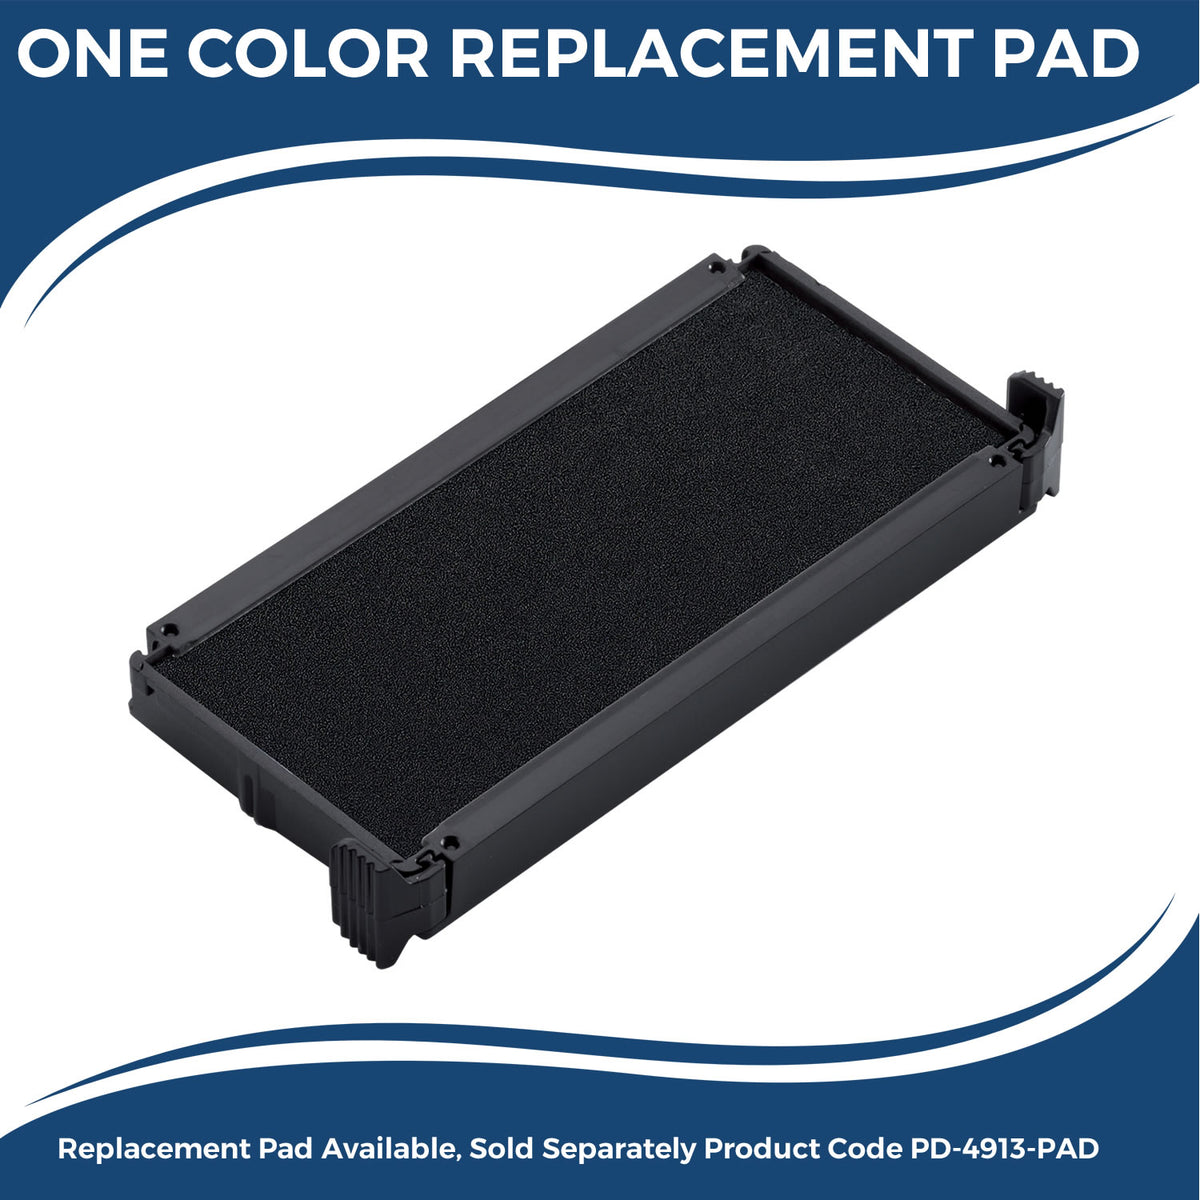 Large Self Inking Please Correct Stamp 4640S Large Replacment Pad